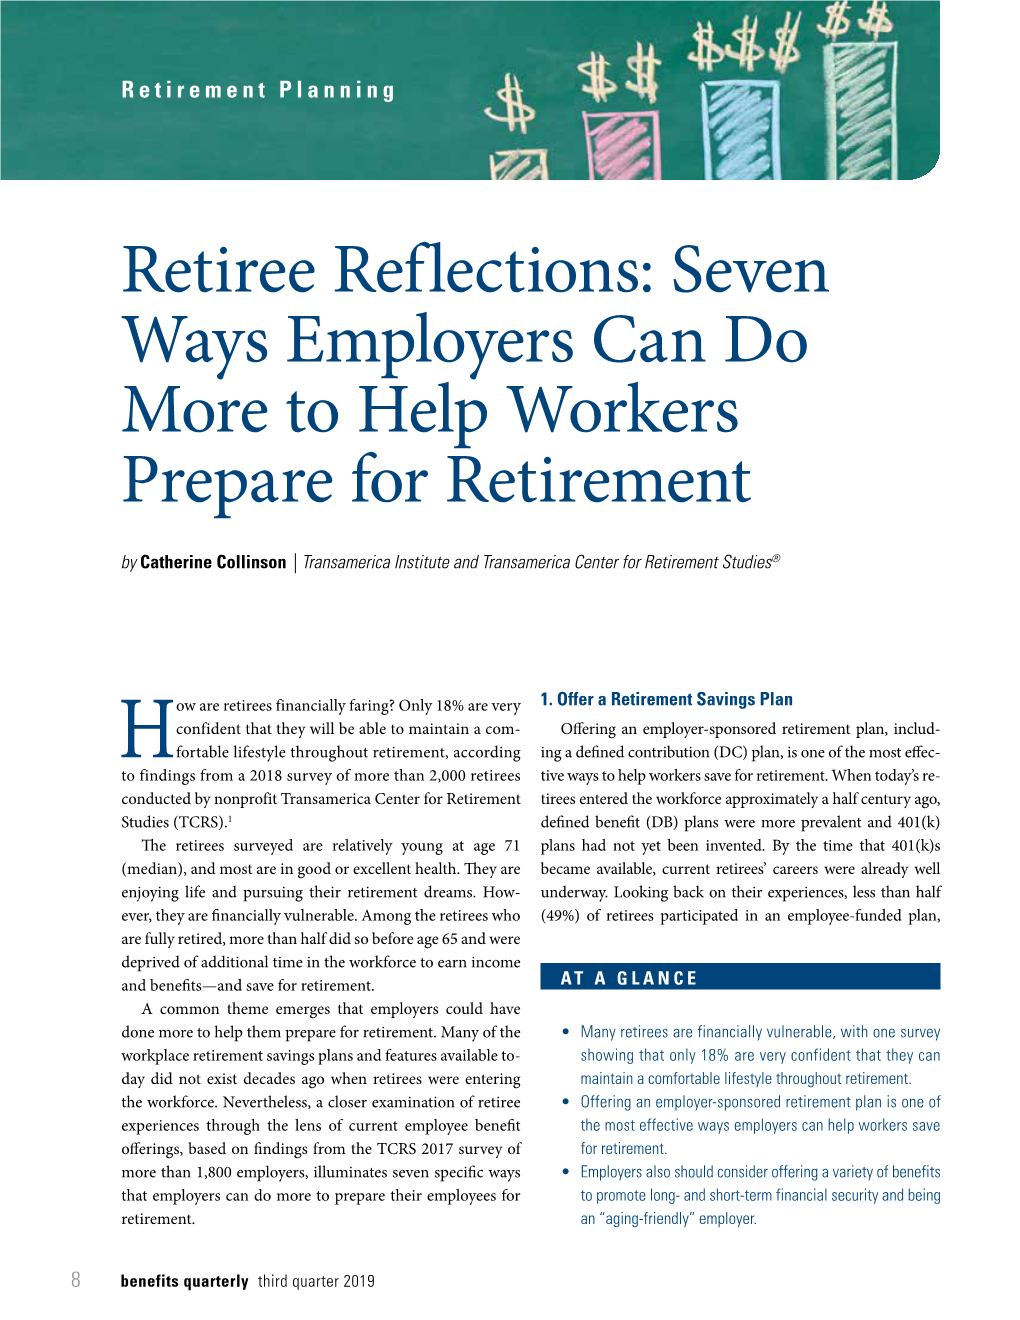 Seven Ways Employers Can Do More to Help Workers Prepare for Retirement